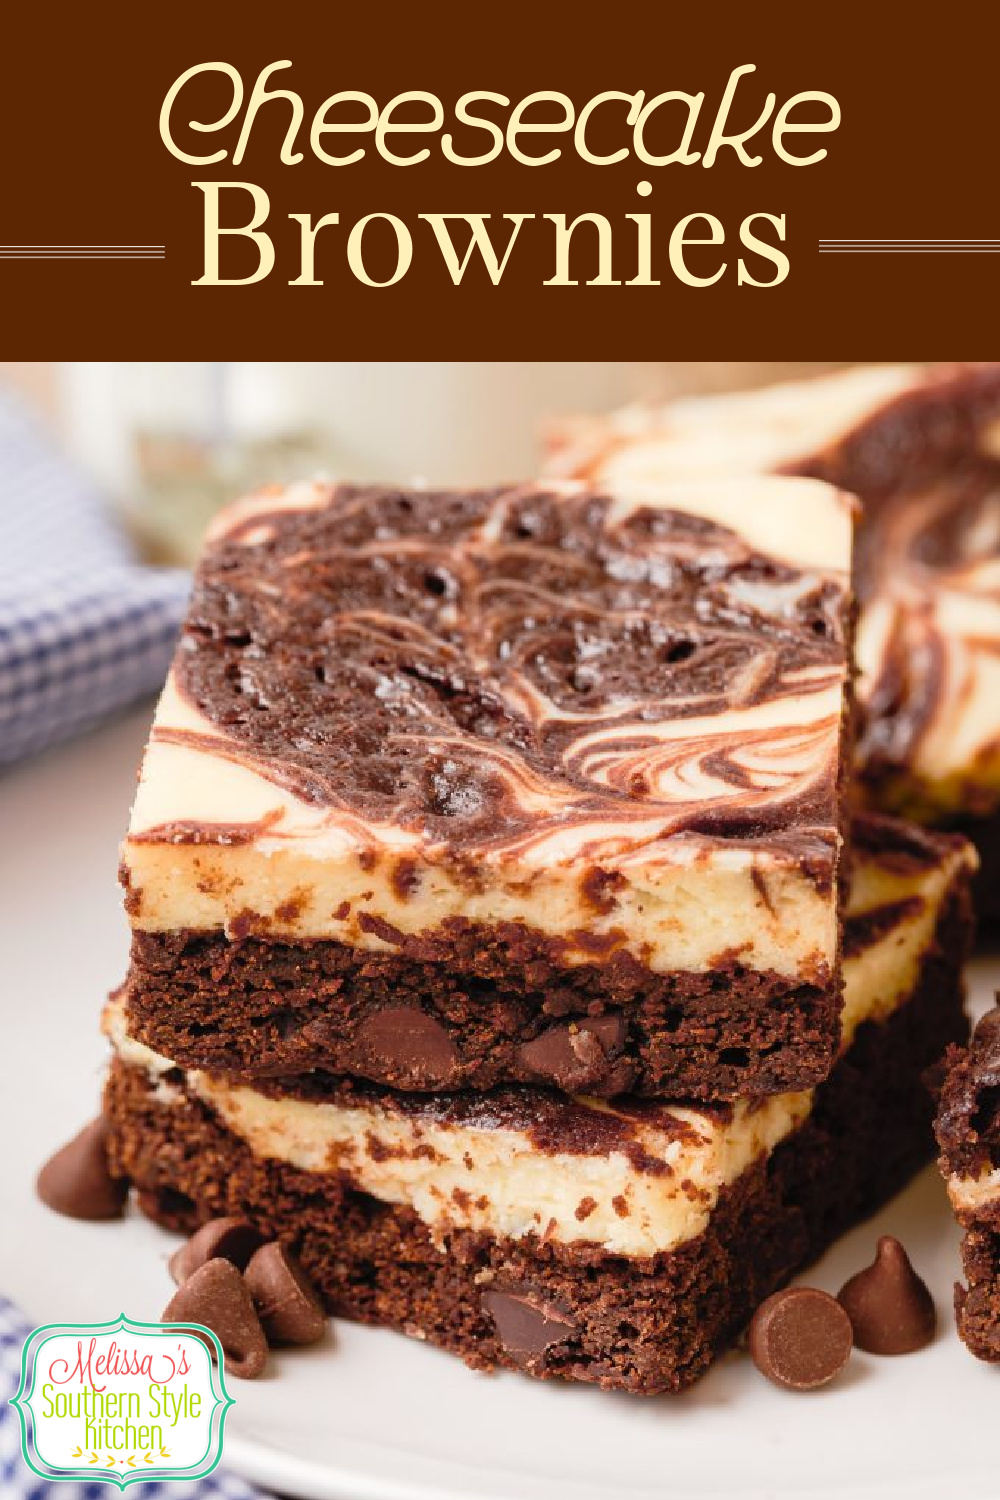 These Cheesecake Brownies from backyard barbecues, to casual parties and holiday gatherings #brownies #cheesecakebrownies #brownierecipes #cheesecake #browniecheesecake #cheesecakebrownies #chocolatedesserts